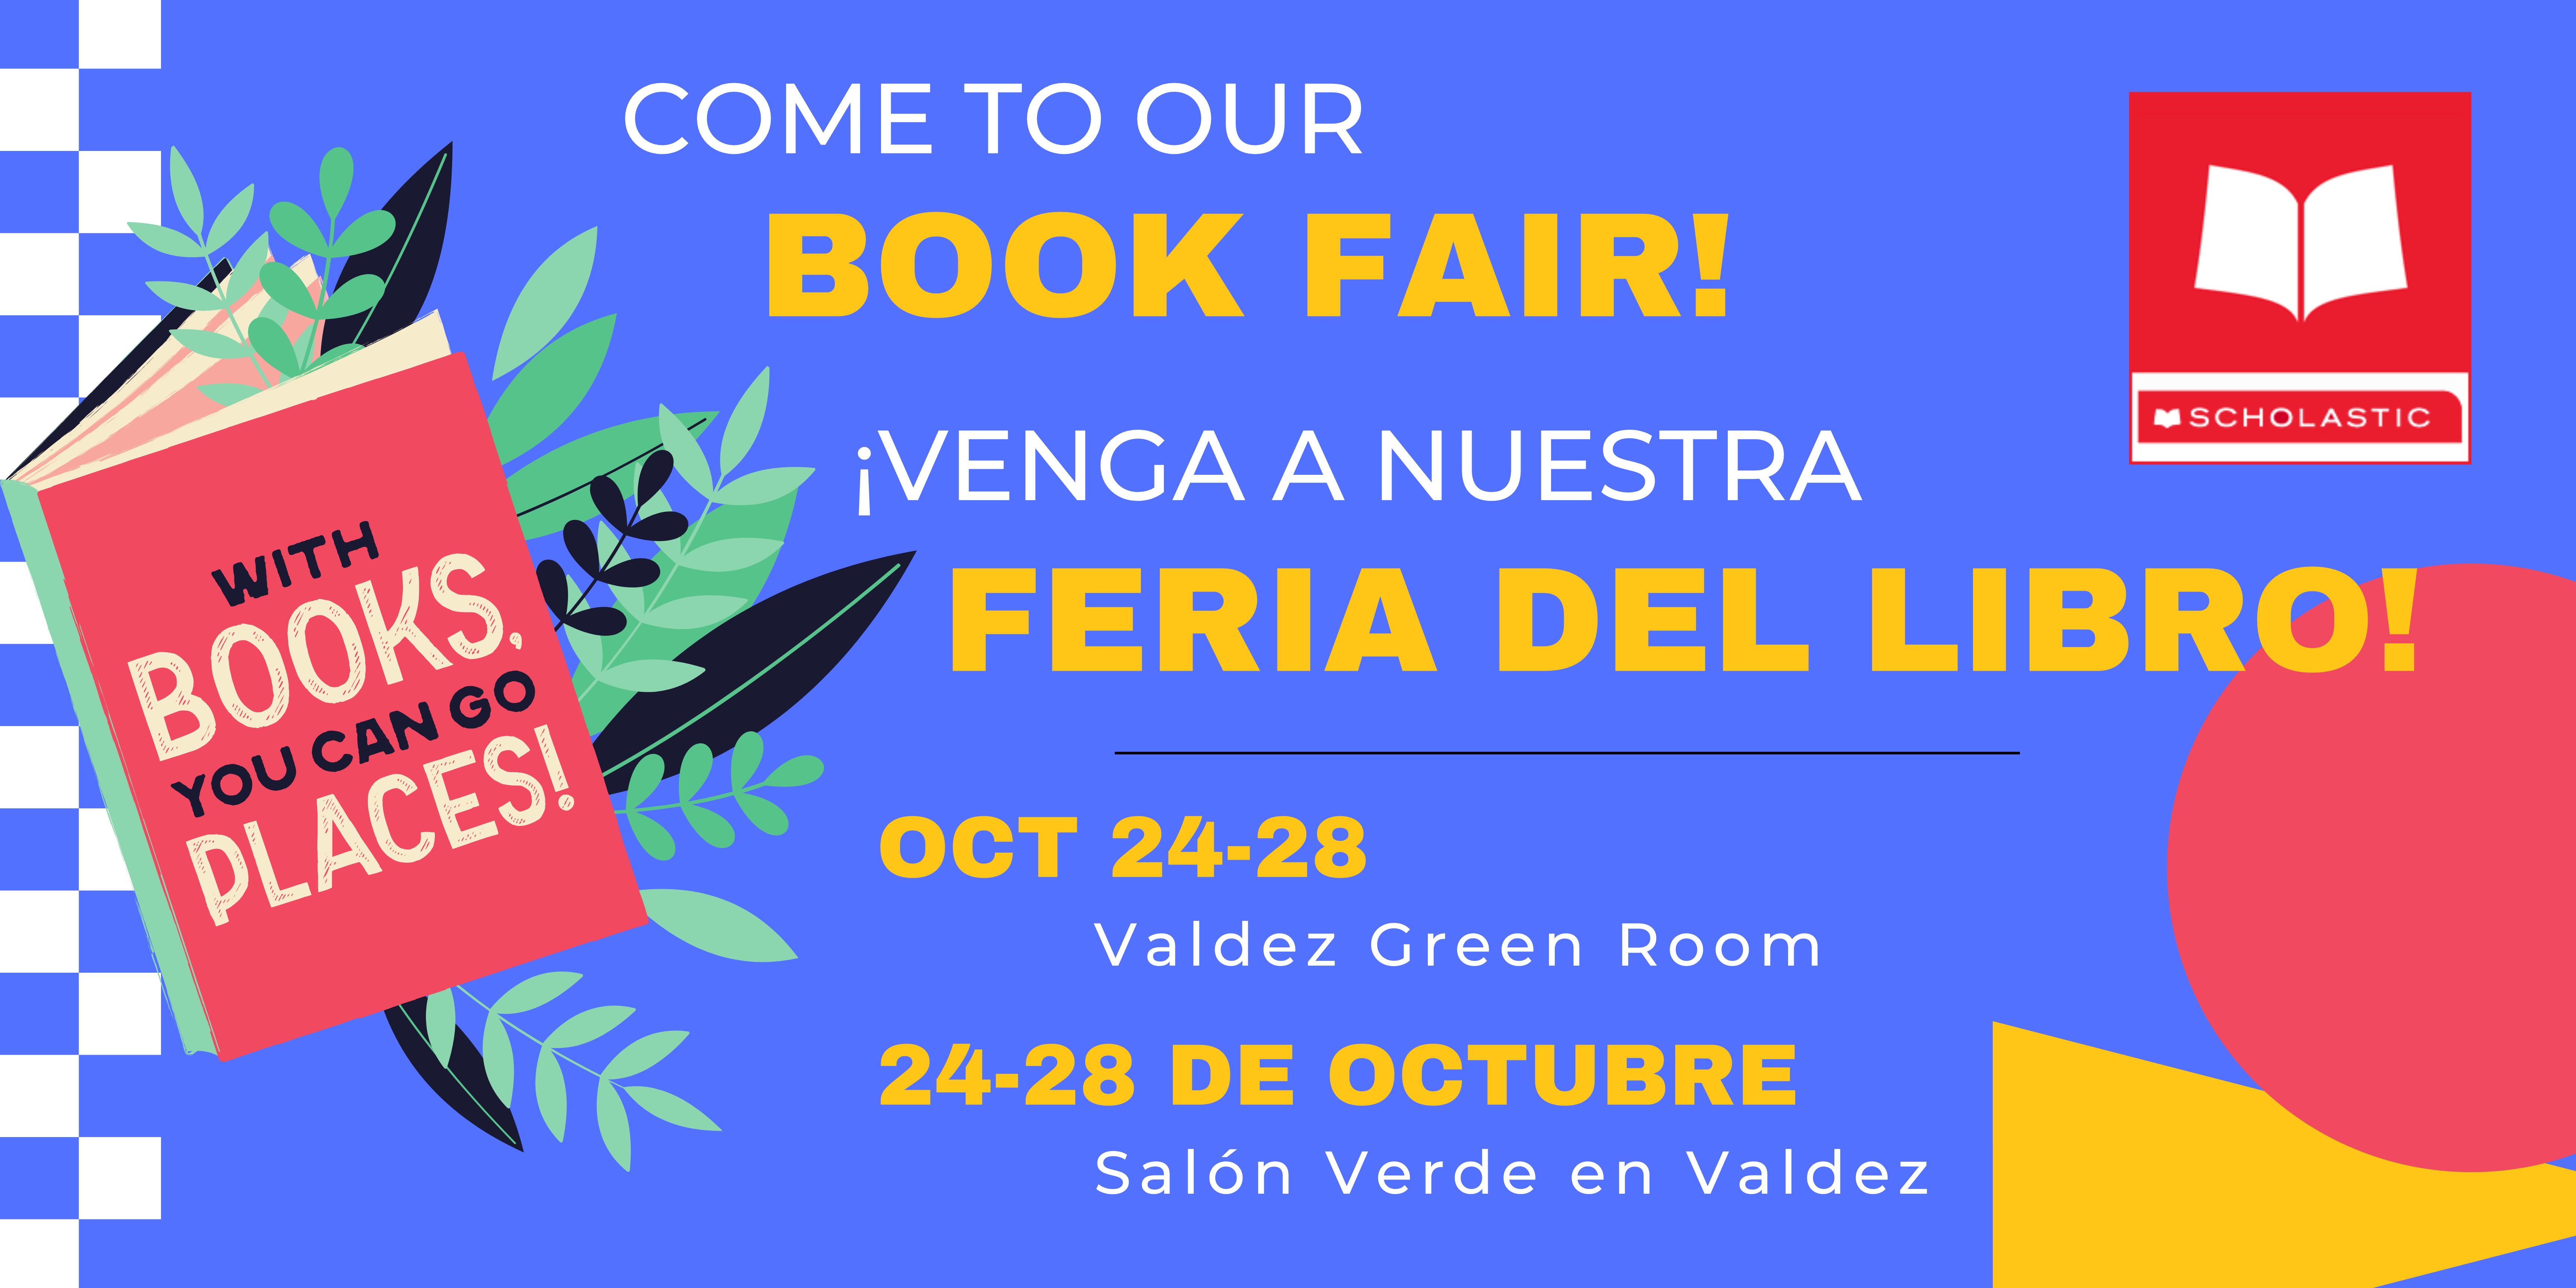 Yellow and white text on blue background says, "Come to Our Book Fair! Oct 24-28, Valdez Green Room" and "¡Venga a nuestra feria del libro! 24-28 de octubre. Salon verde en Valdez."